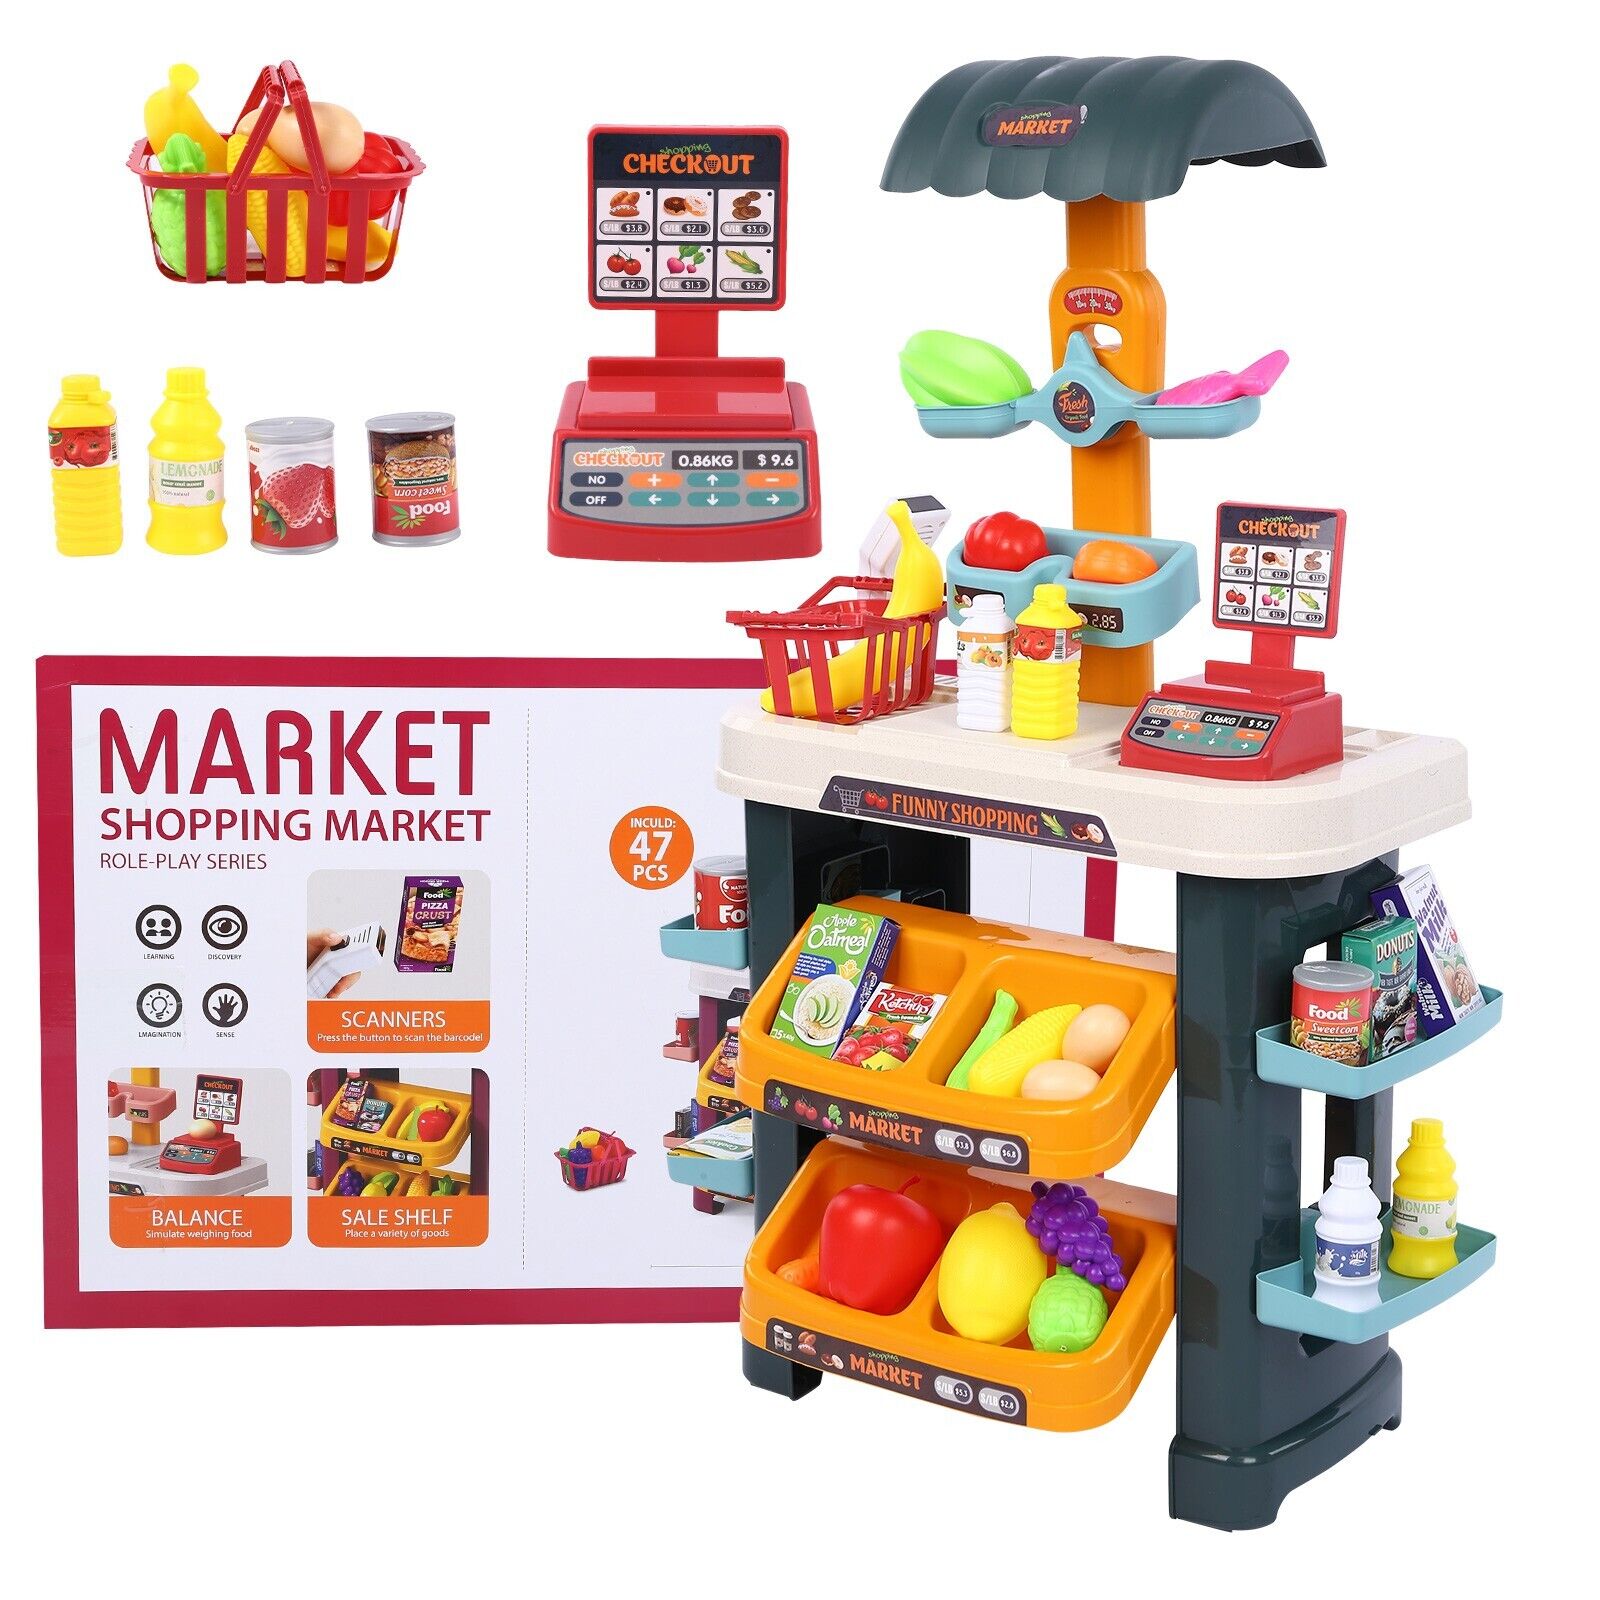 Children's Simulated Supermarket - Kids Grocery Store Selling Stand W/ Toy Cash